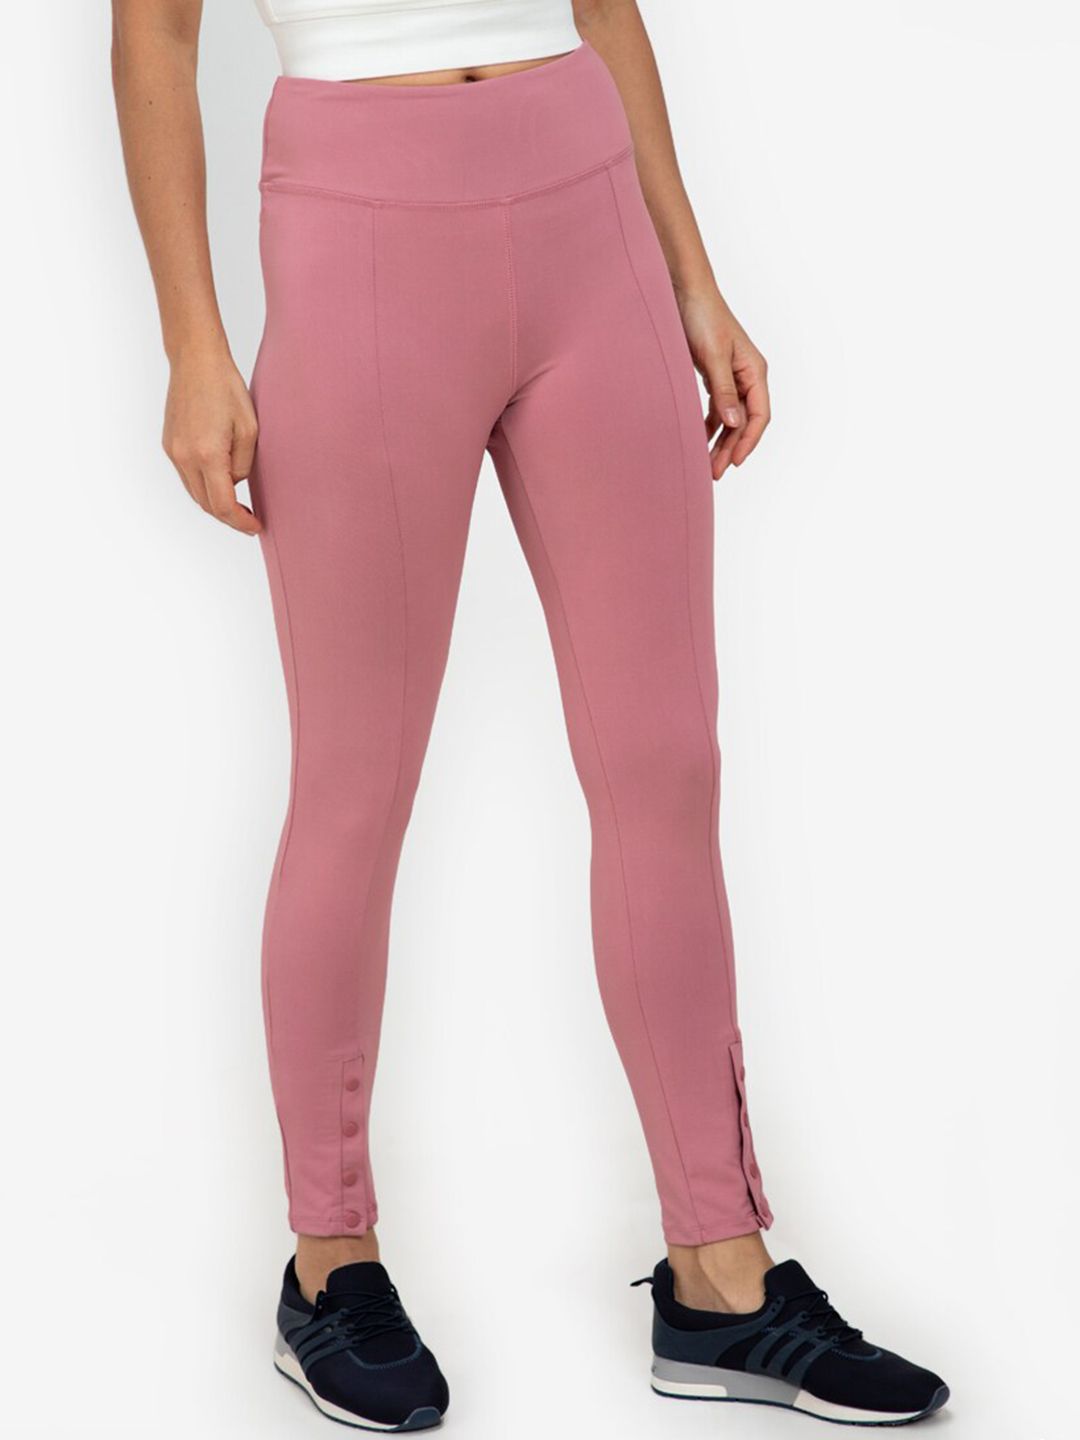 ZALORA ACTIVE Women Pink Sports Tights Price in India